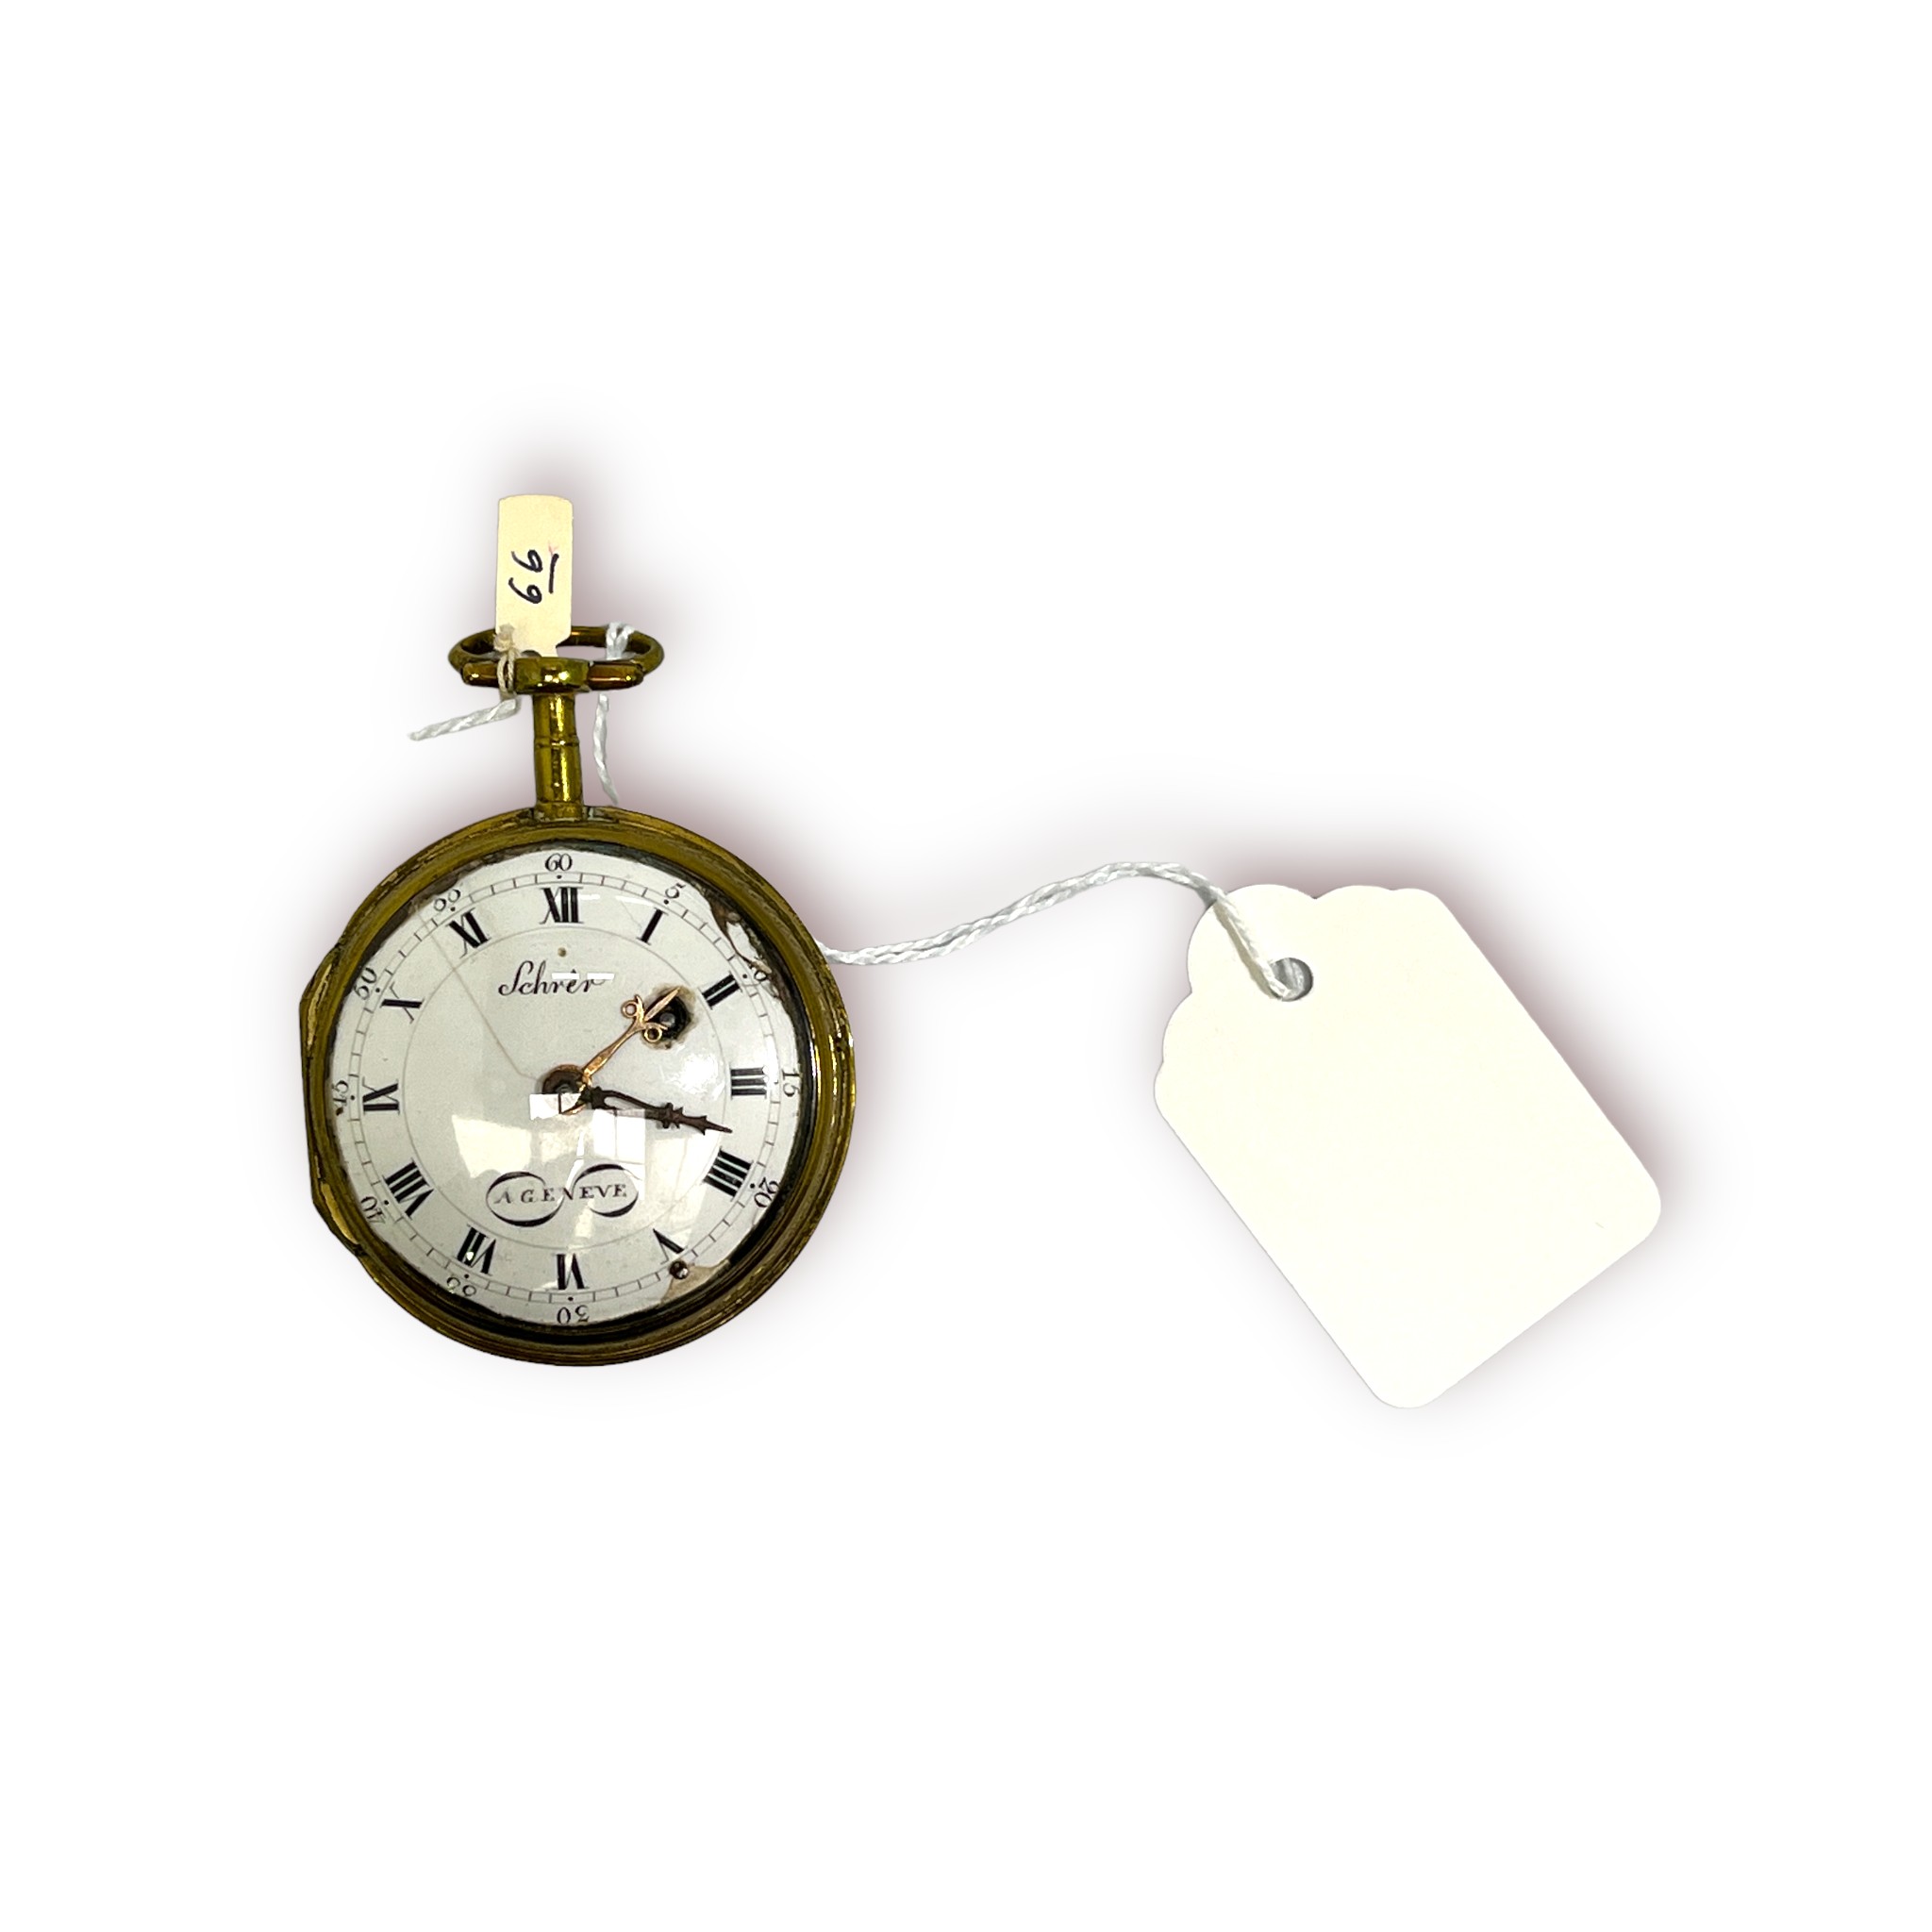 An 18th century continental gilt metal verge pocket watch, the white enamel dial with Roman numerals